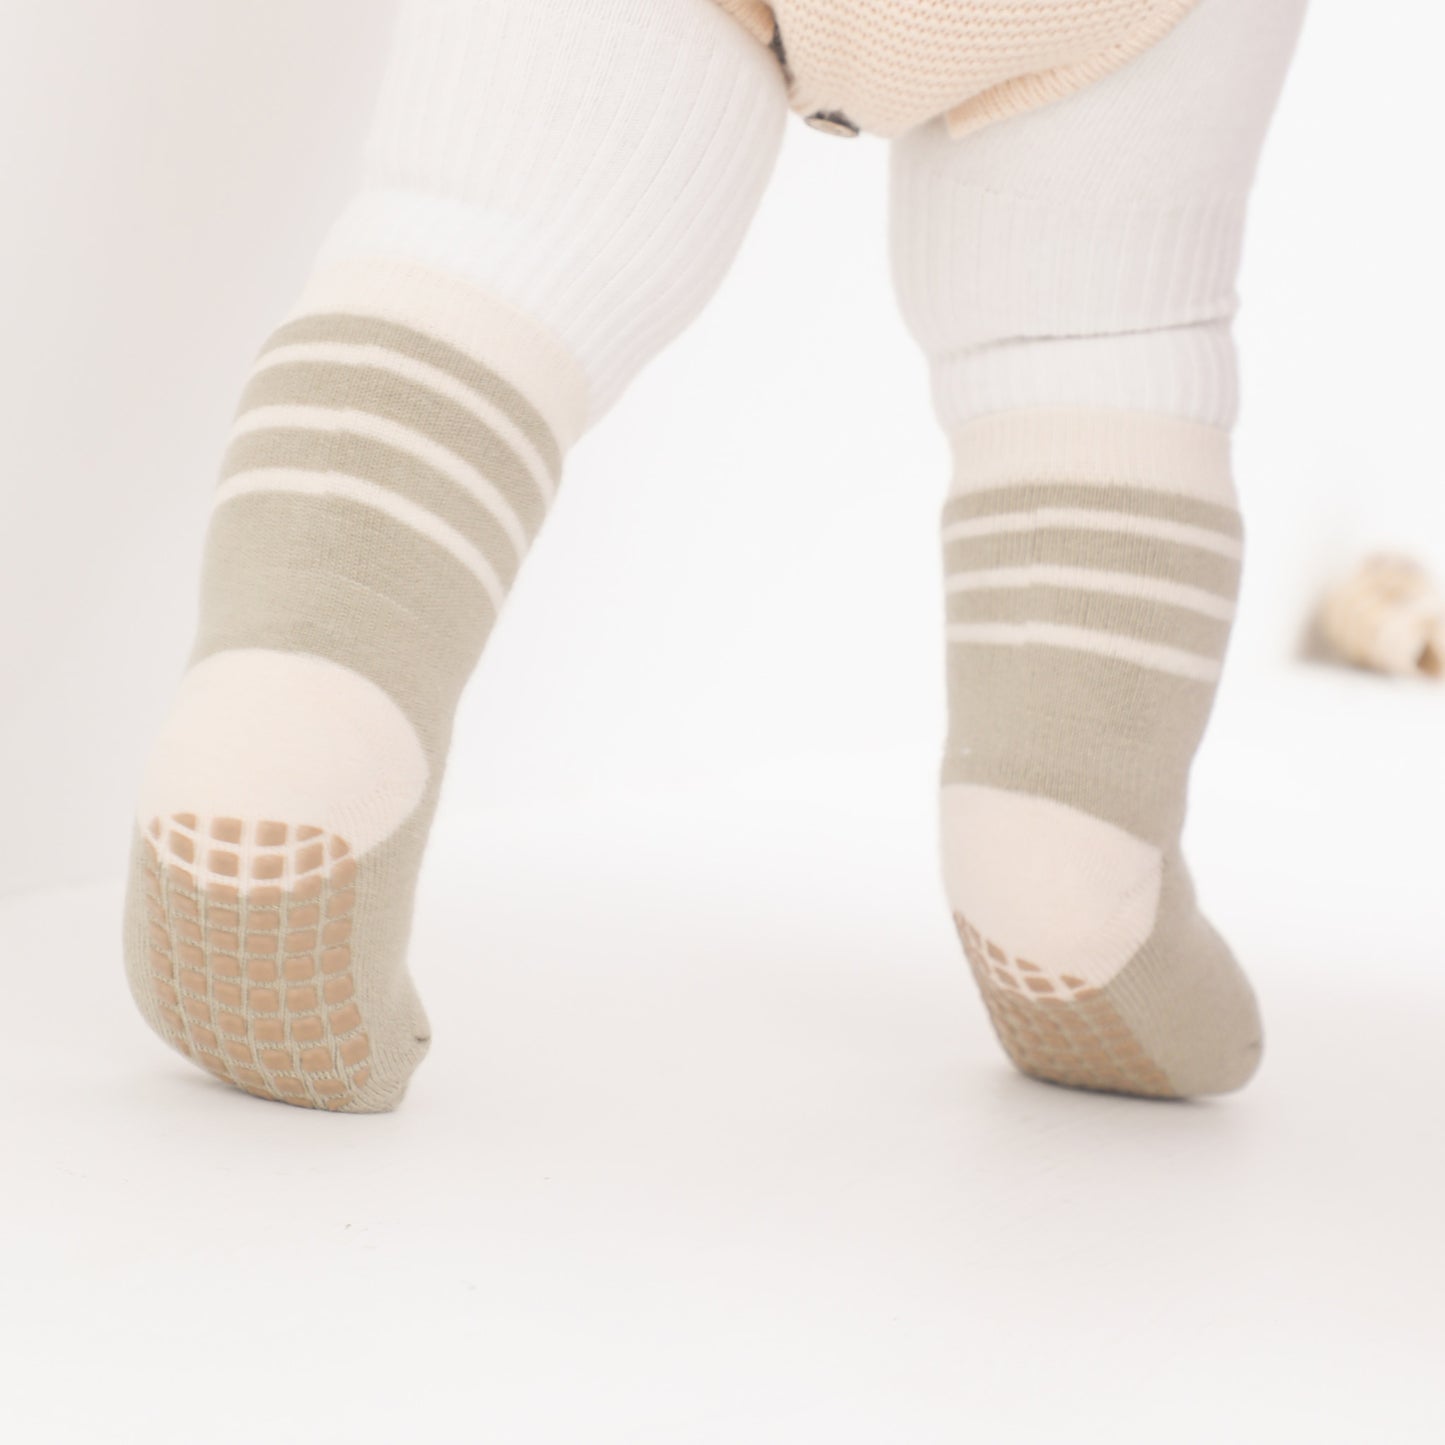 New-Mini Ear- Extra Warm - 4 Pairs of Stay-On Baby & Toddler Non-Slip Socks